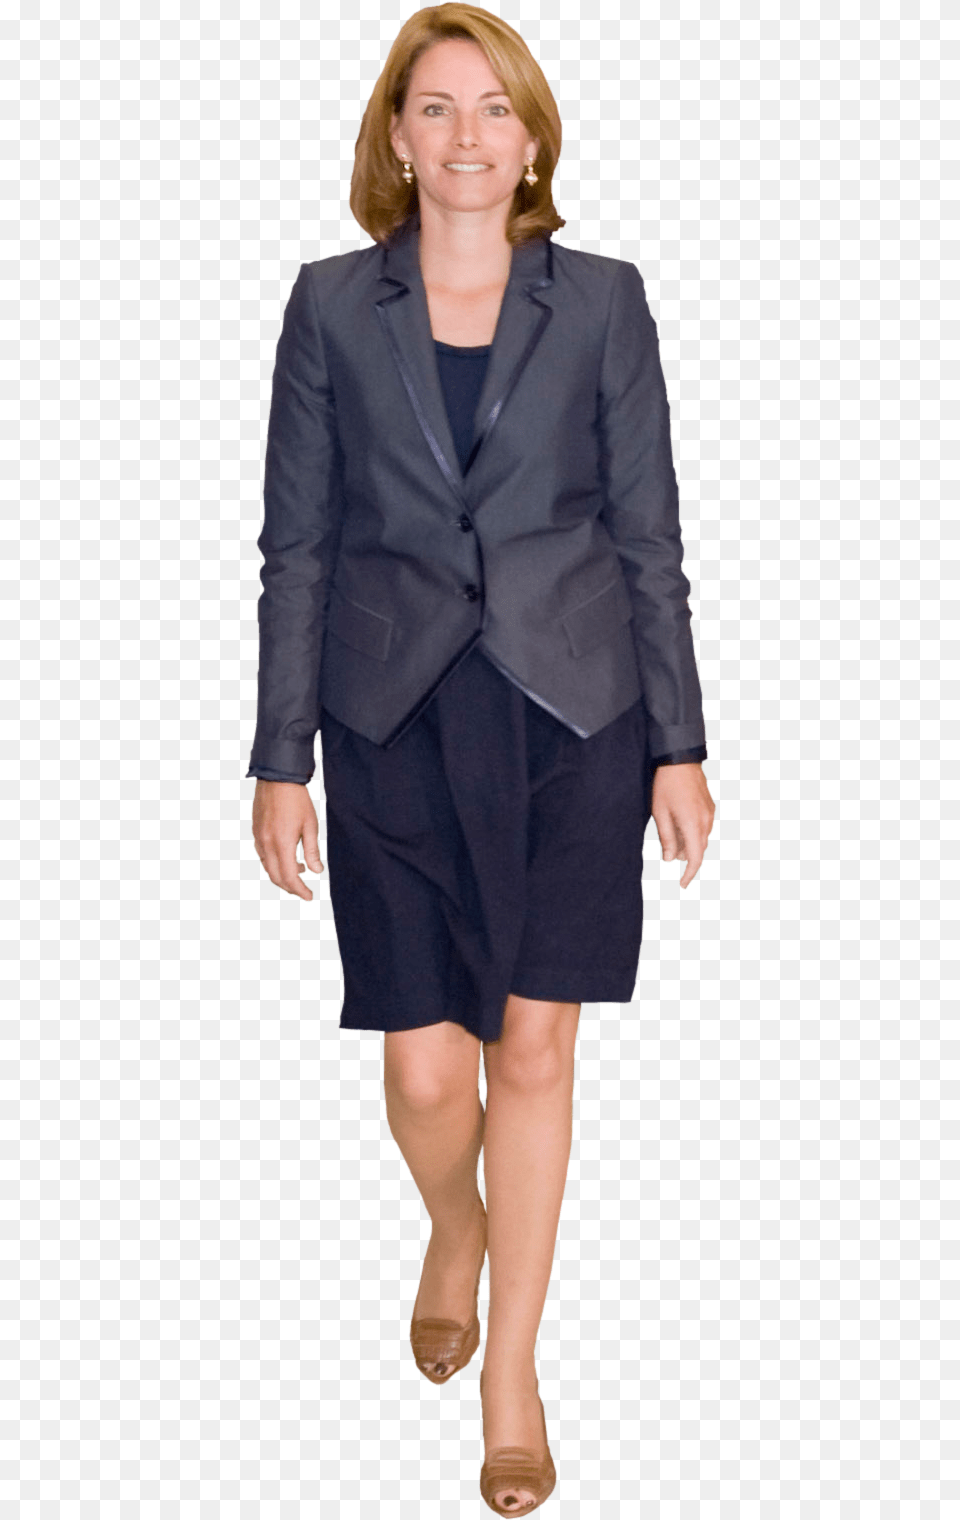 Clothing Business Woman Standing, Formal Wear, Blazer, Coat, Suit Png